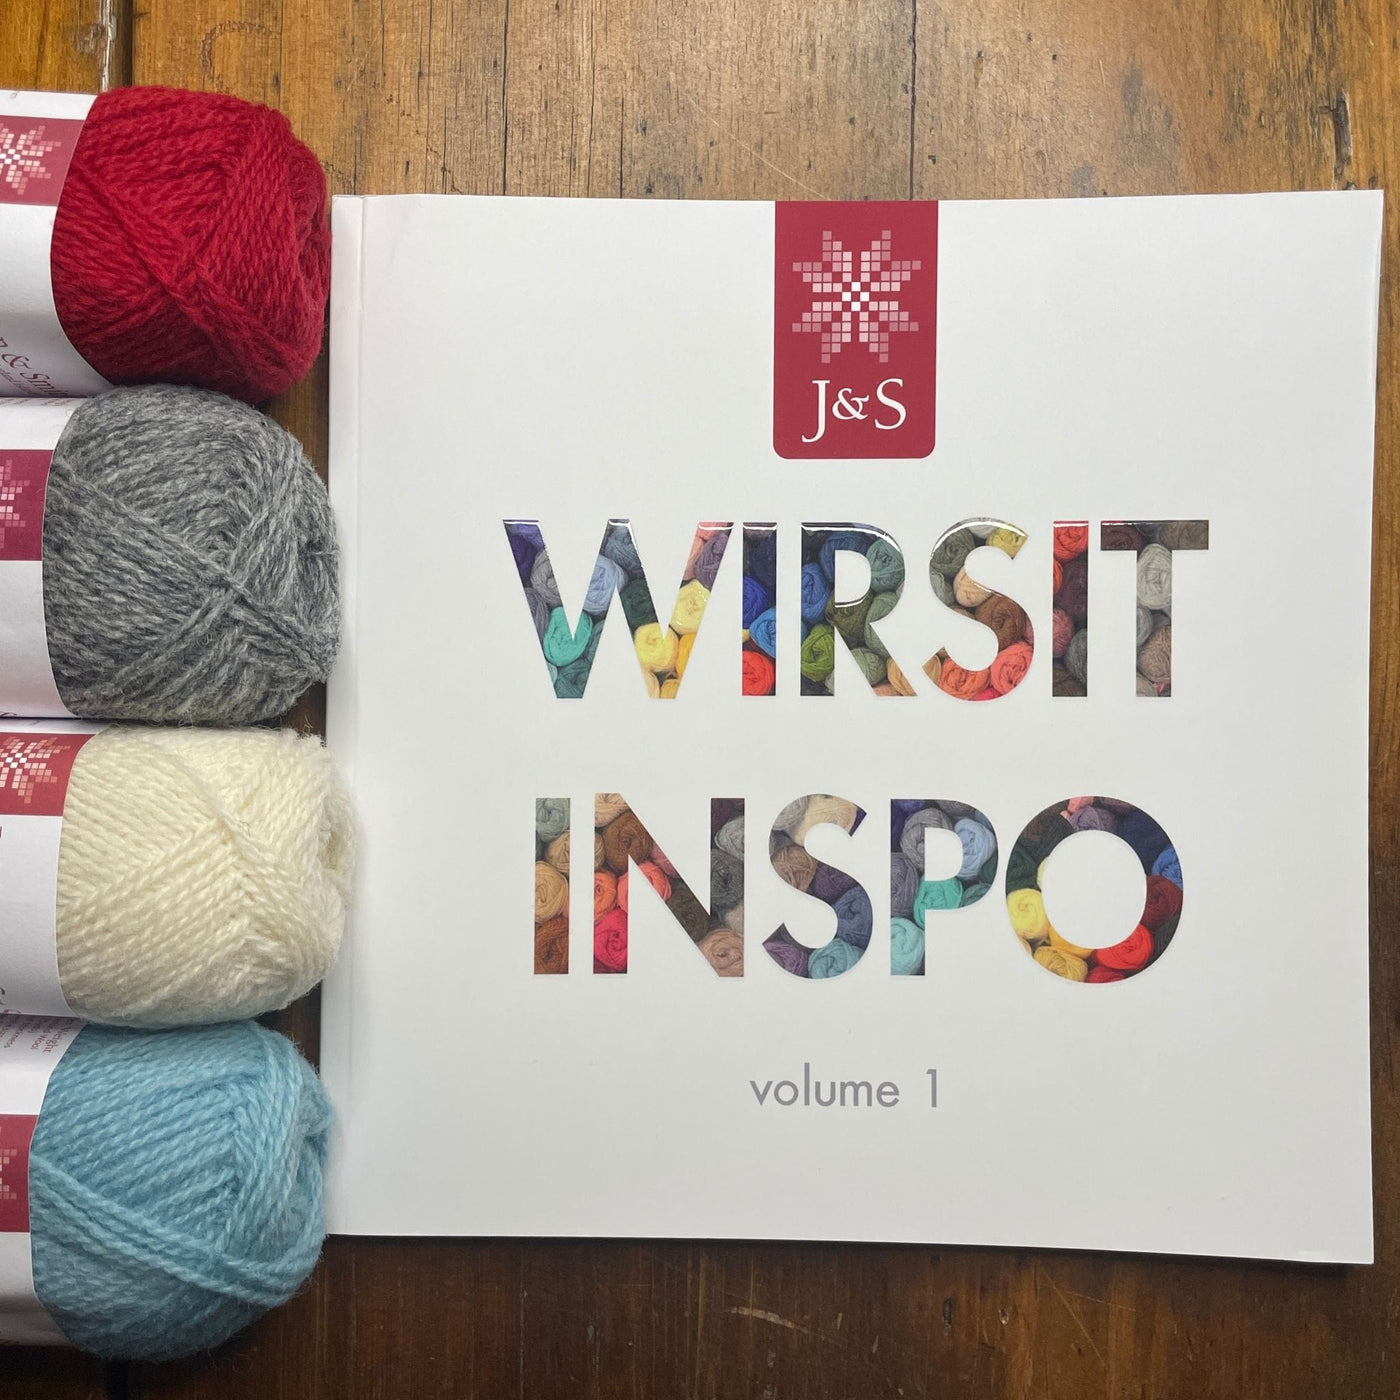 Wirsit Inspo Volume 1 from Jamieson & Smith. Cover of book is shown with several balls of Jamieson & Smith 2ply Jumper Weight yarn to the left of the book. 